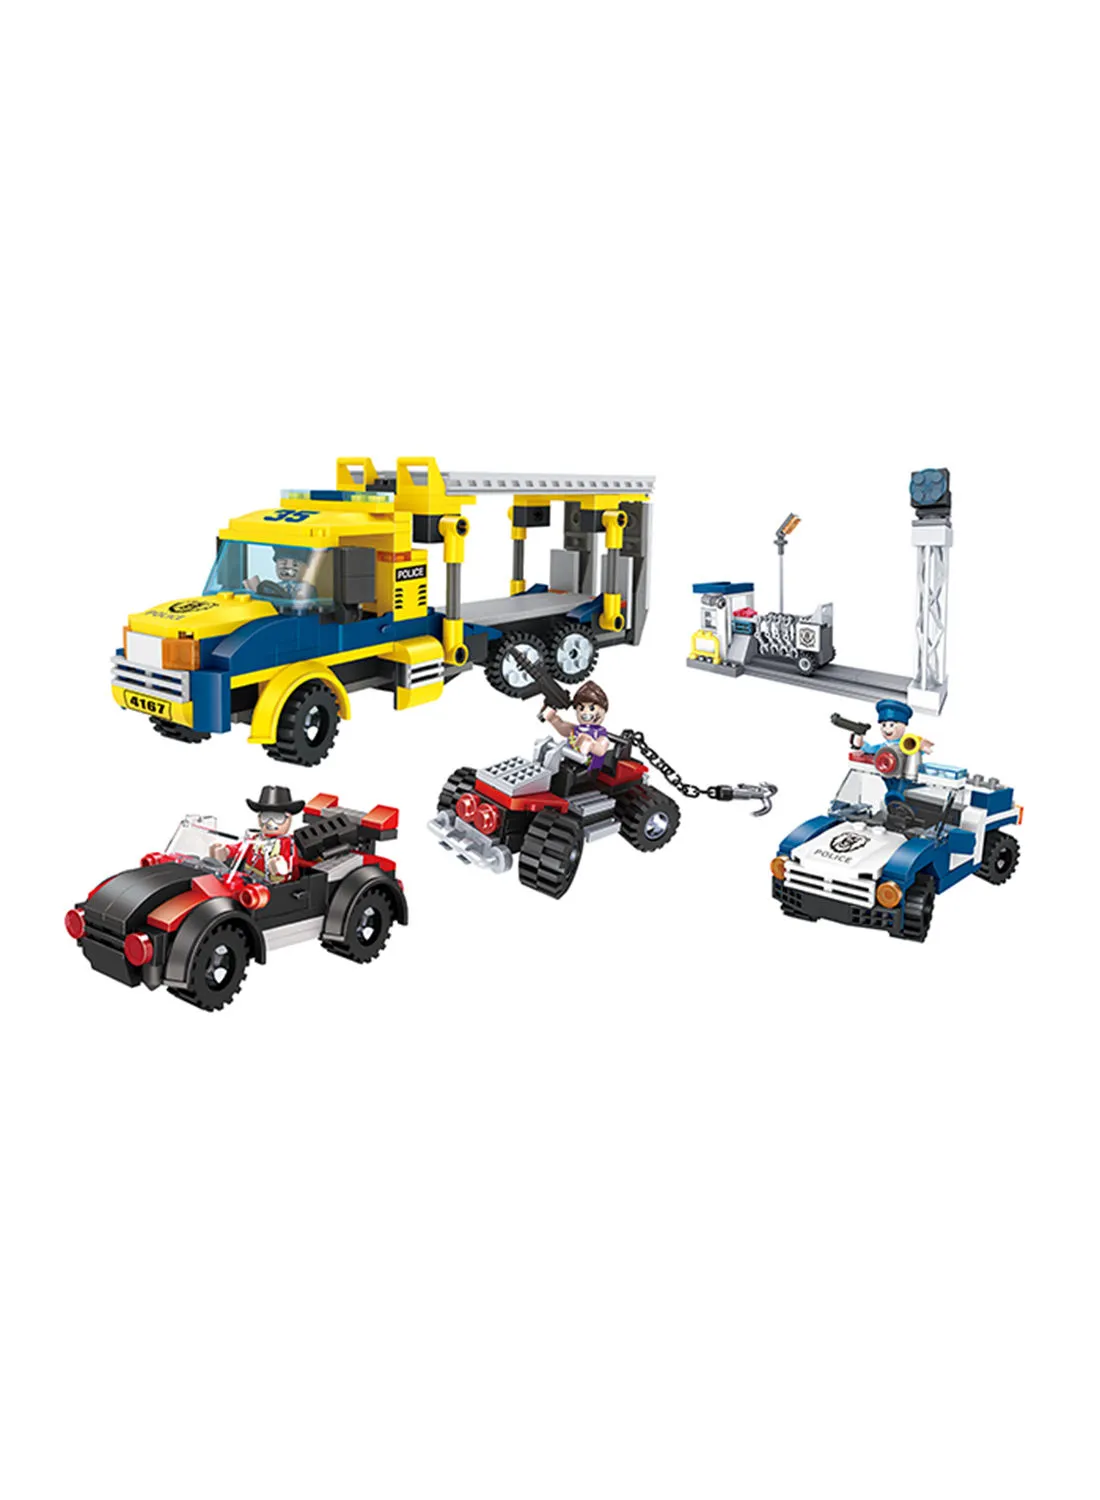 COGO 4167 550-Piece Police Series Non-Toxic Plastic Building Block Set For Kids, 6+ Years